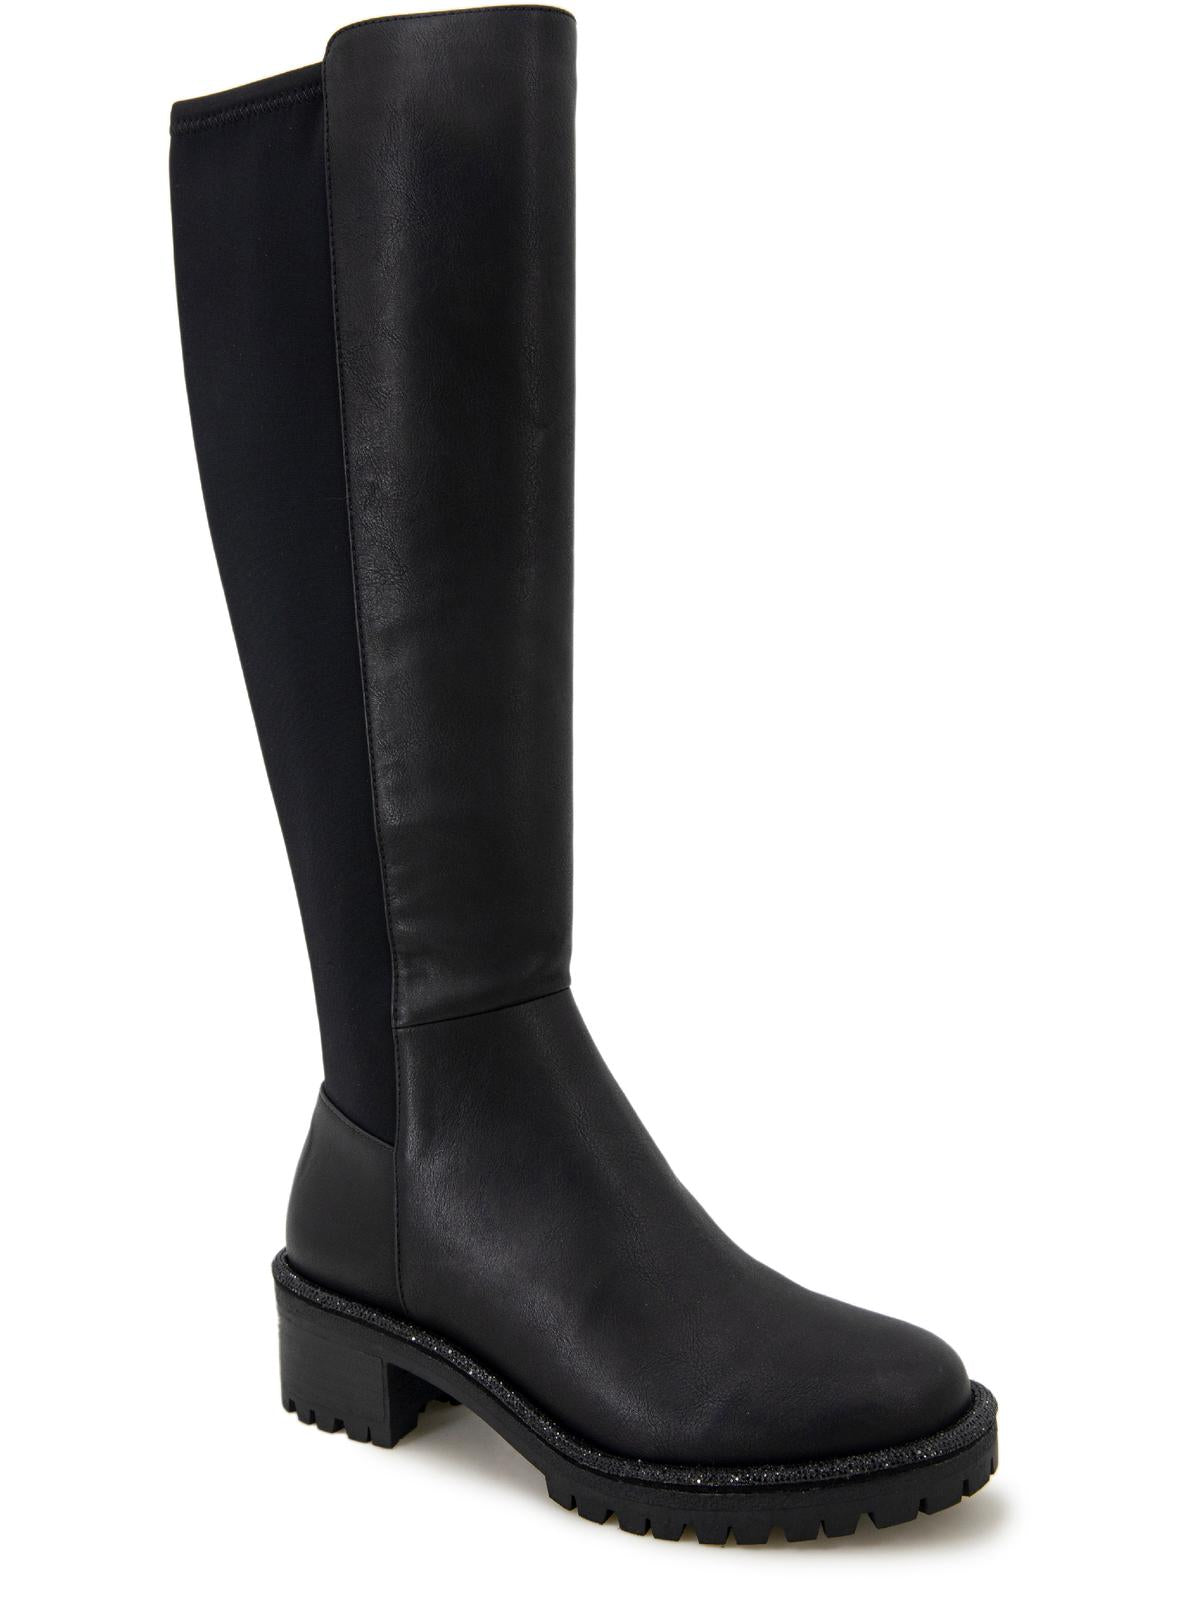 KENNETH COLE REACTION Tate Jewel Stretch Womens Zipper Tall Knee-High Boots